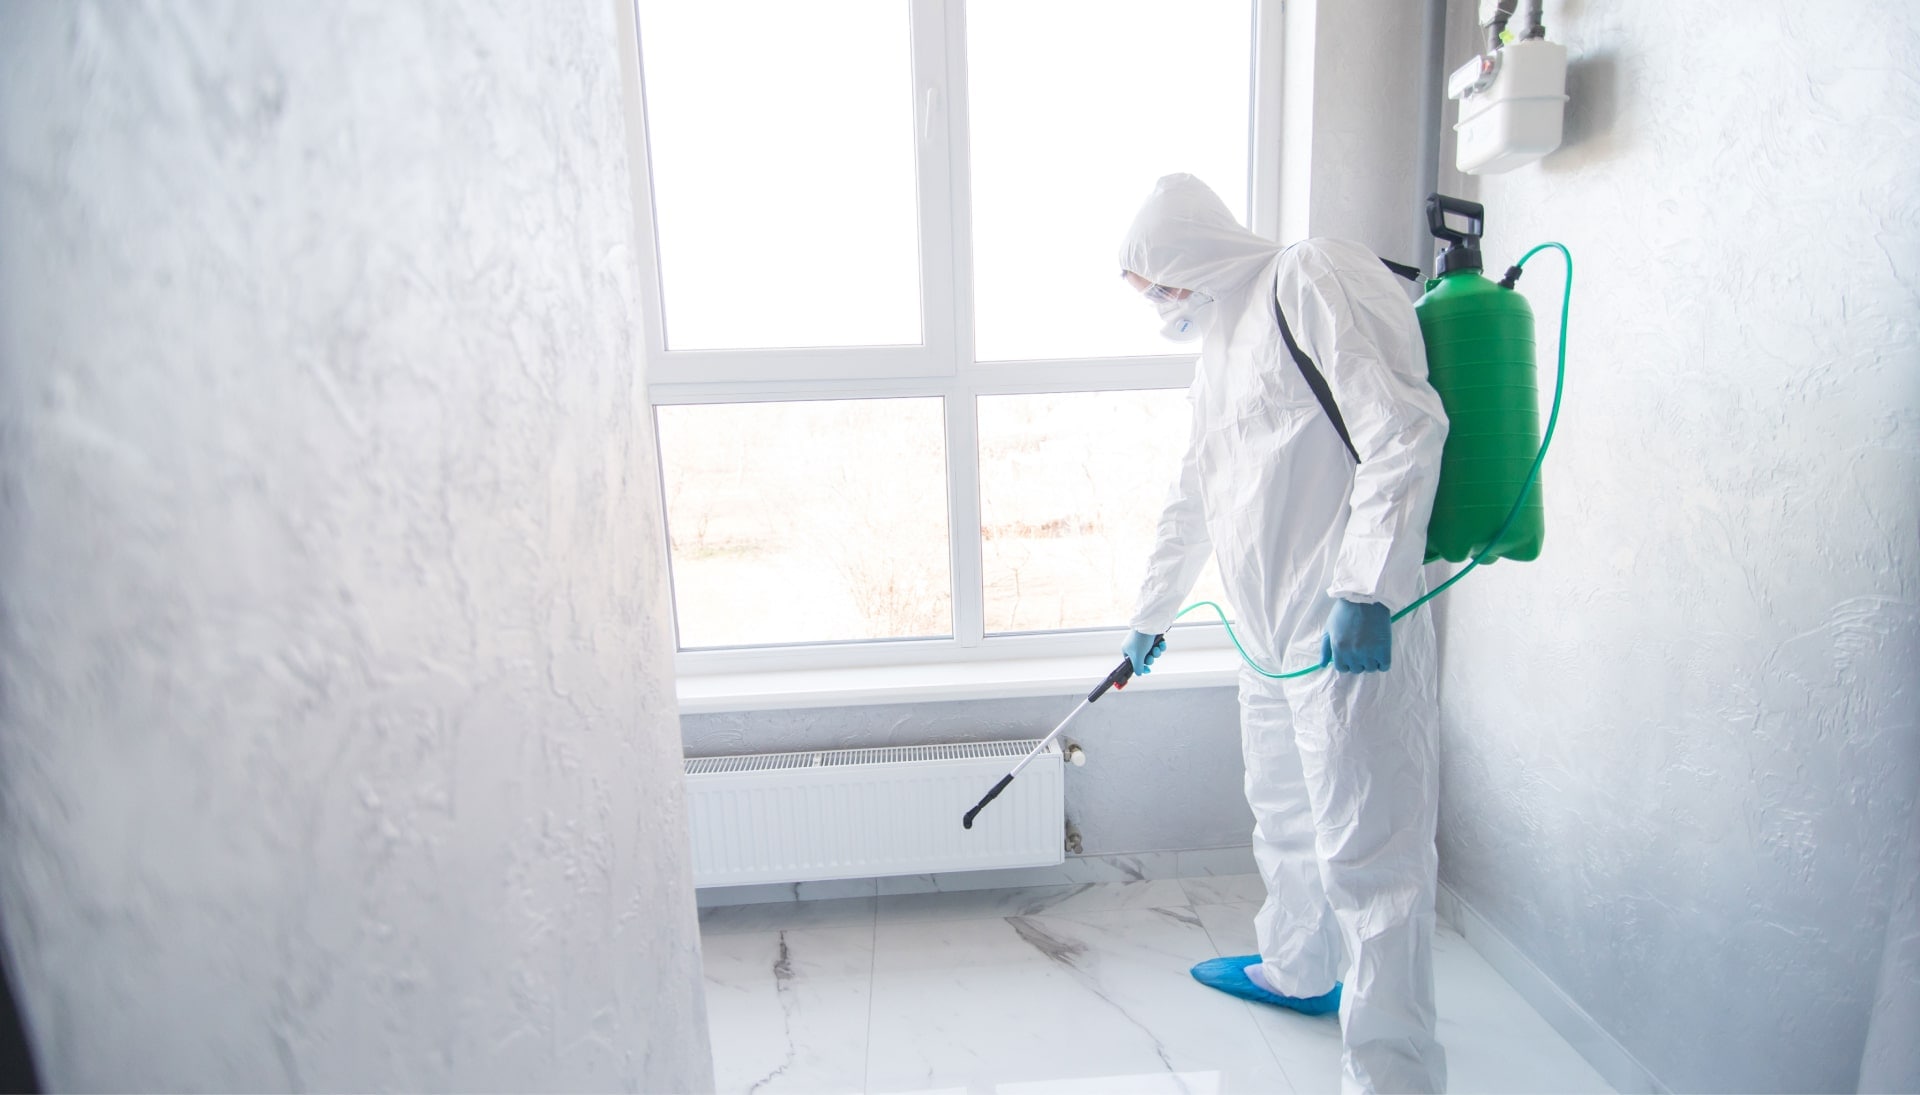 We provide the highest-quality mold inspection, testing, and removal services in the Champaign, Illinois area.